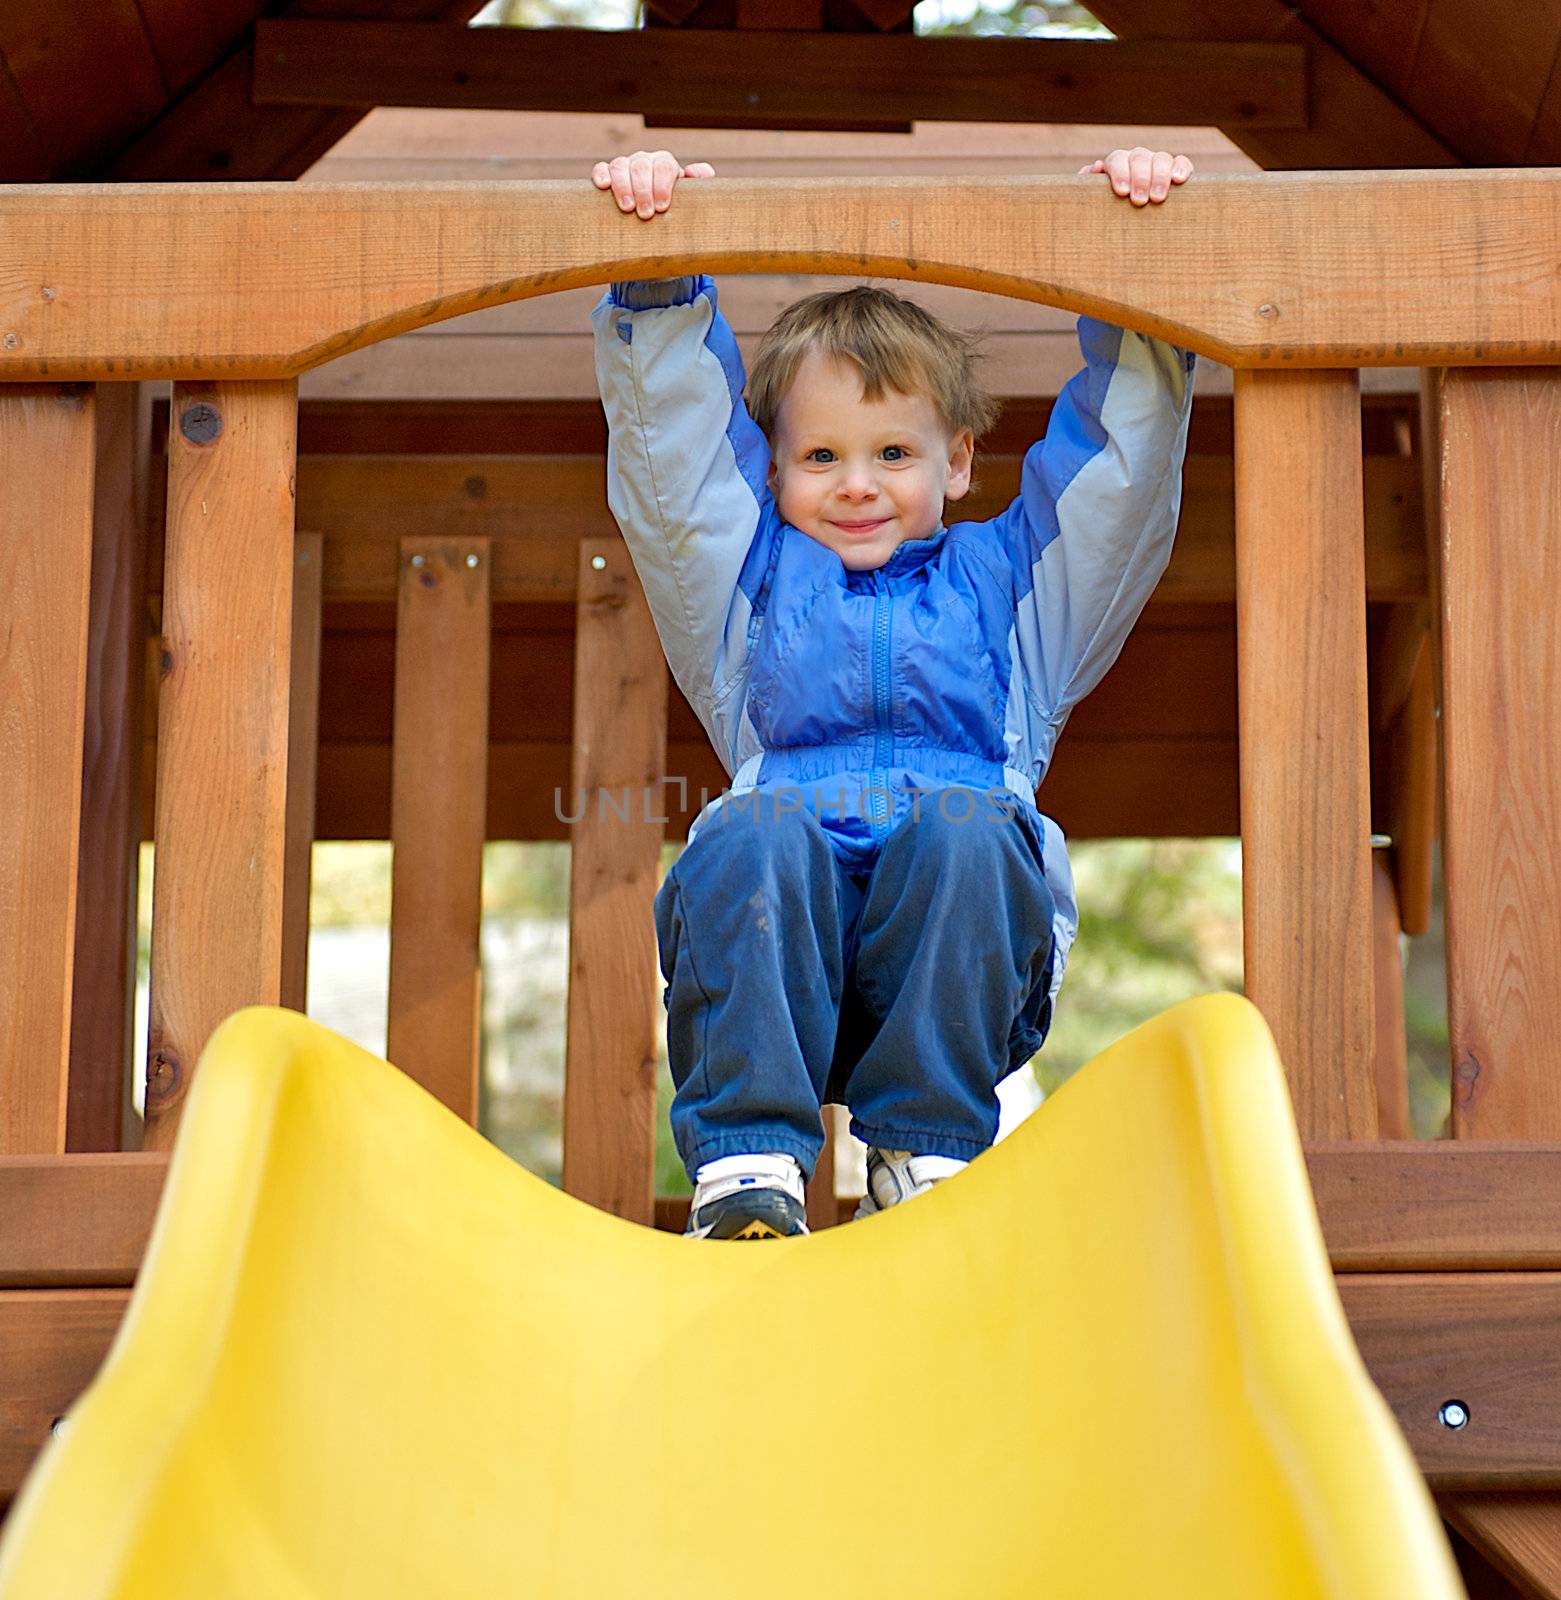 Cute young boy grasping the bar while getting ready to slide down a sliding board at the playground.